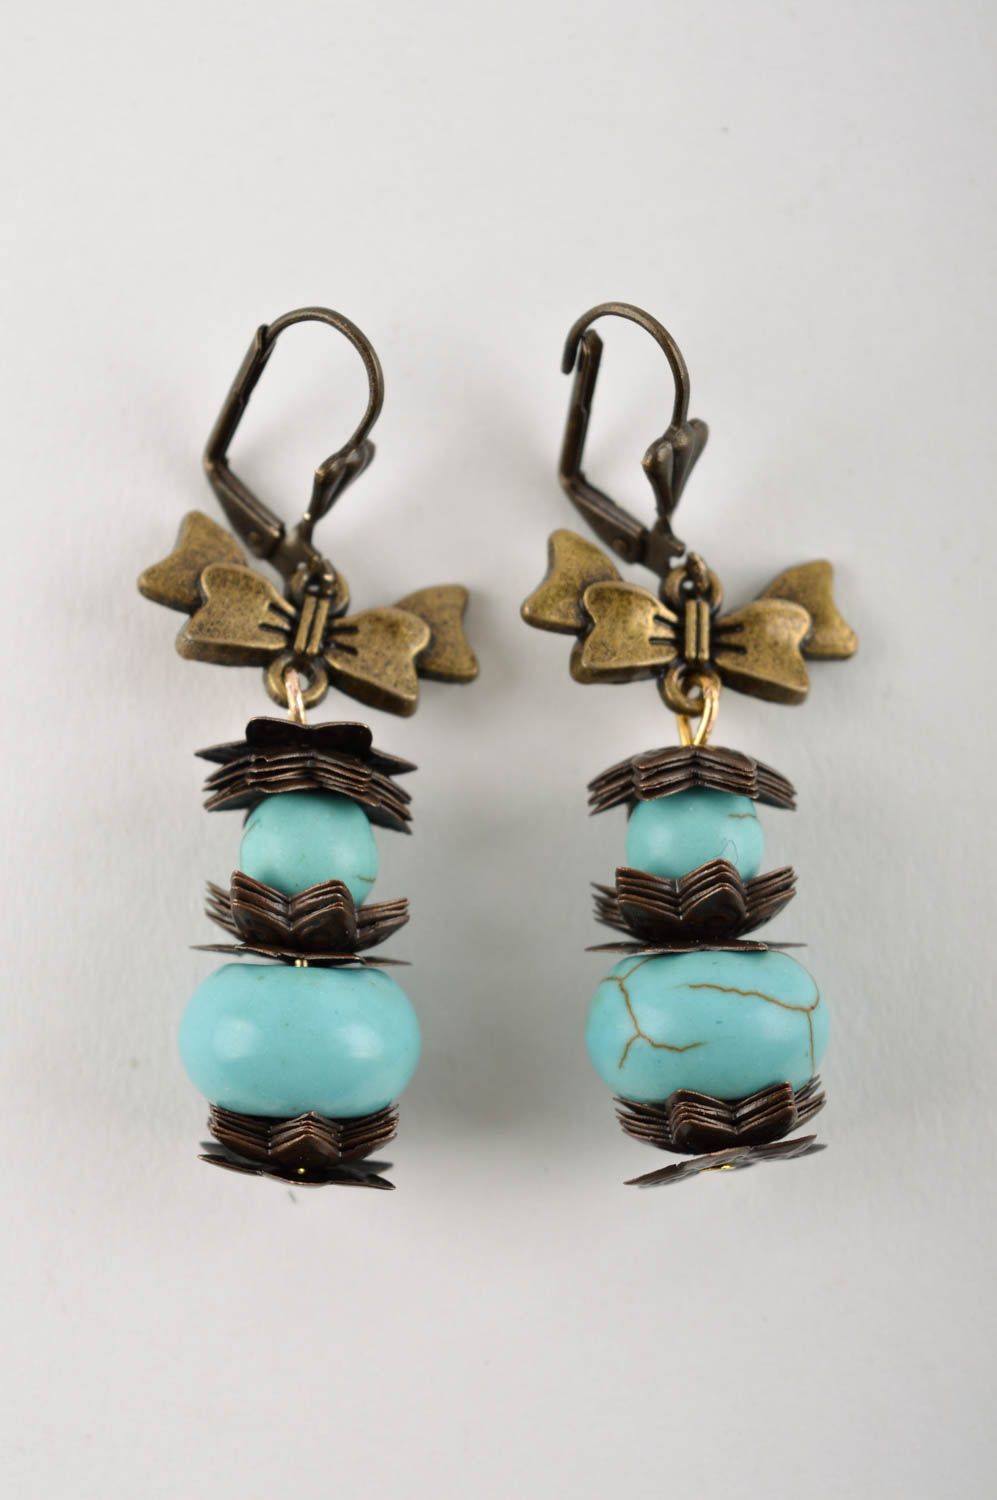 Homemade jewelry designer earrings turquoise earrings cool jewelry gifts for her photo 2